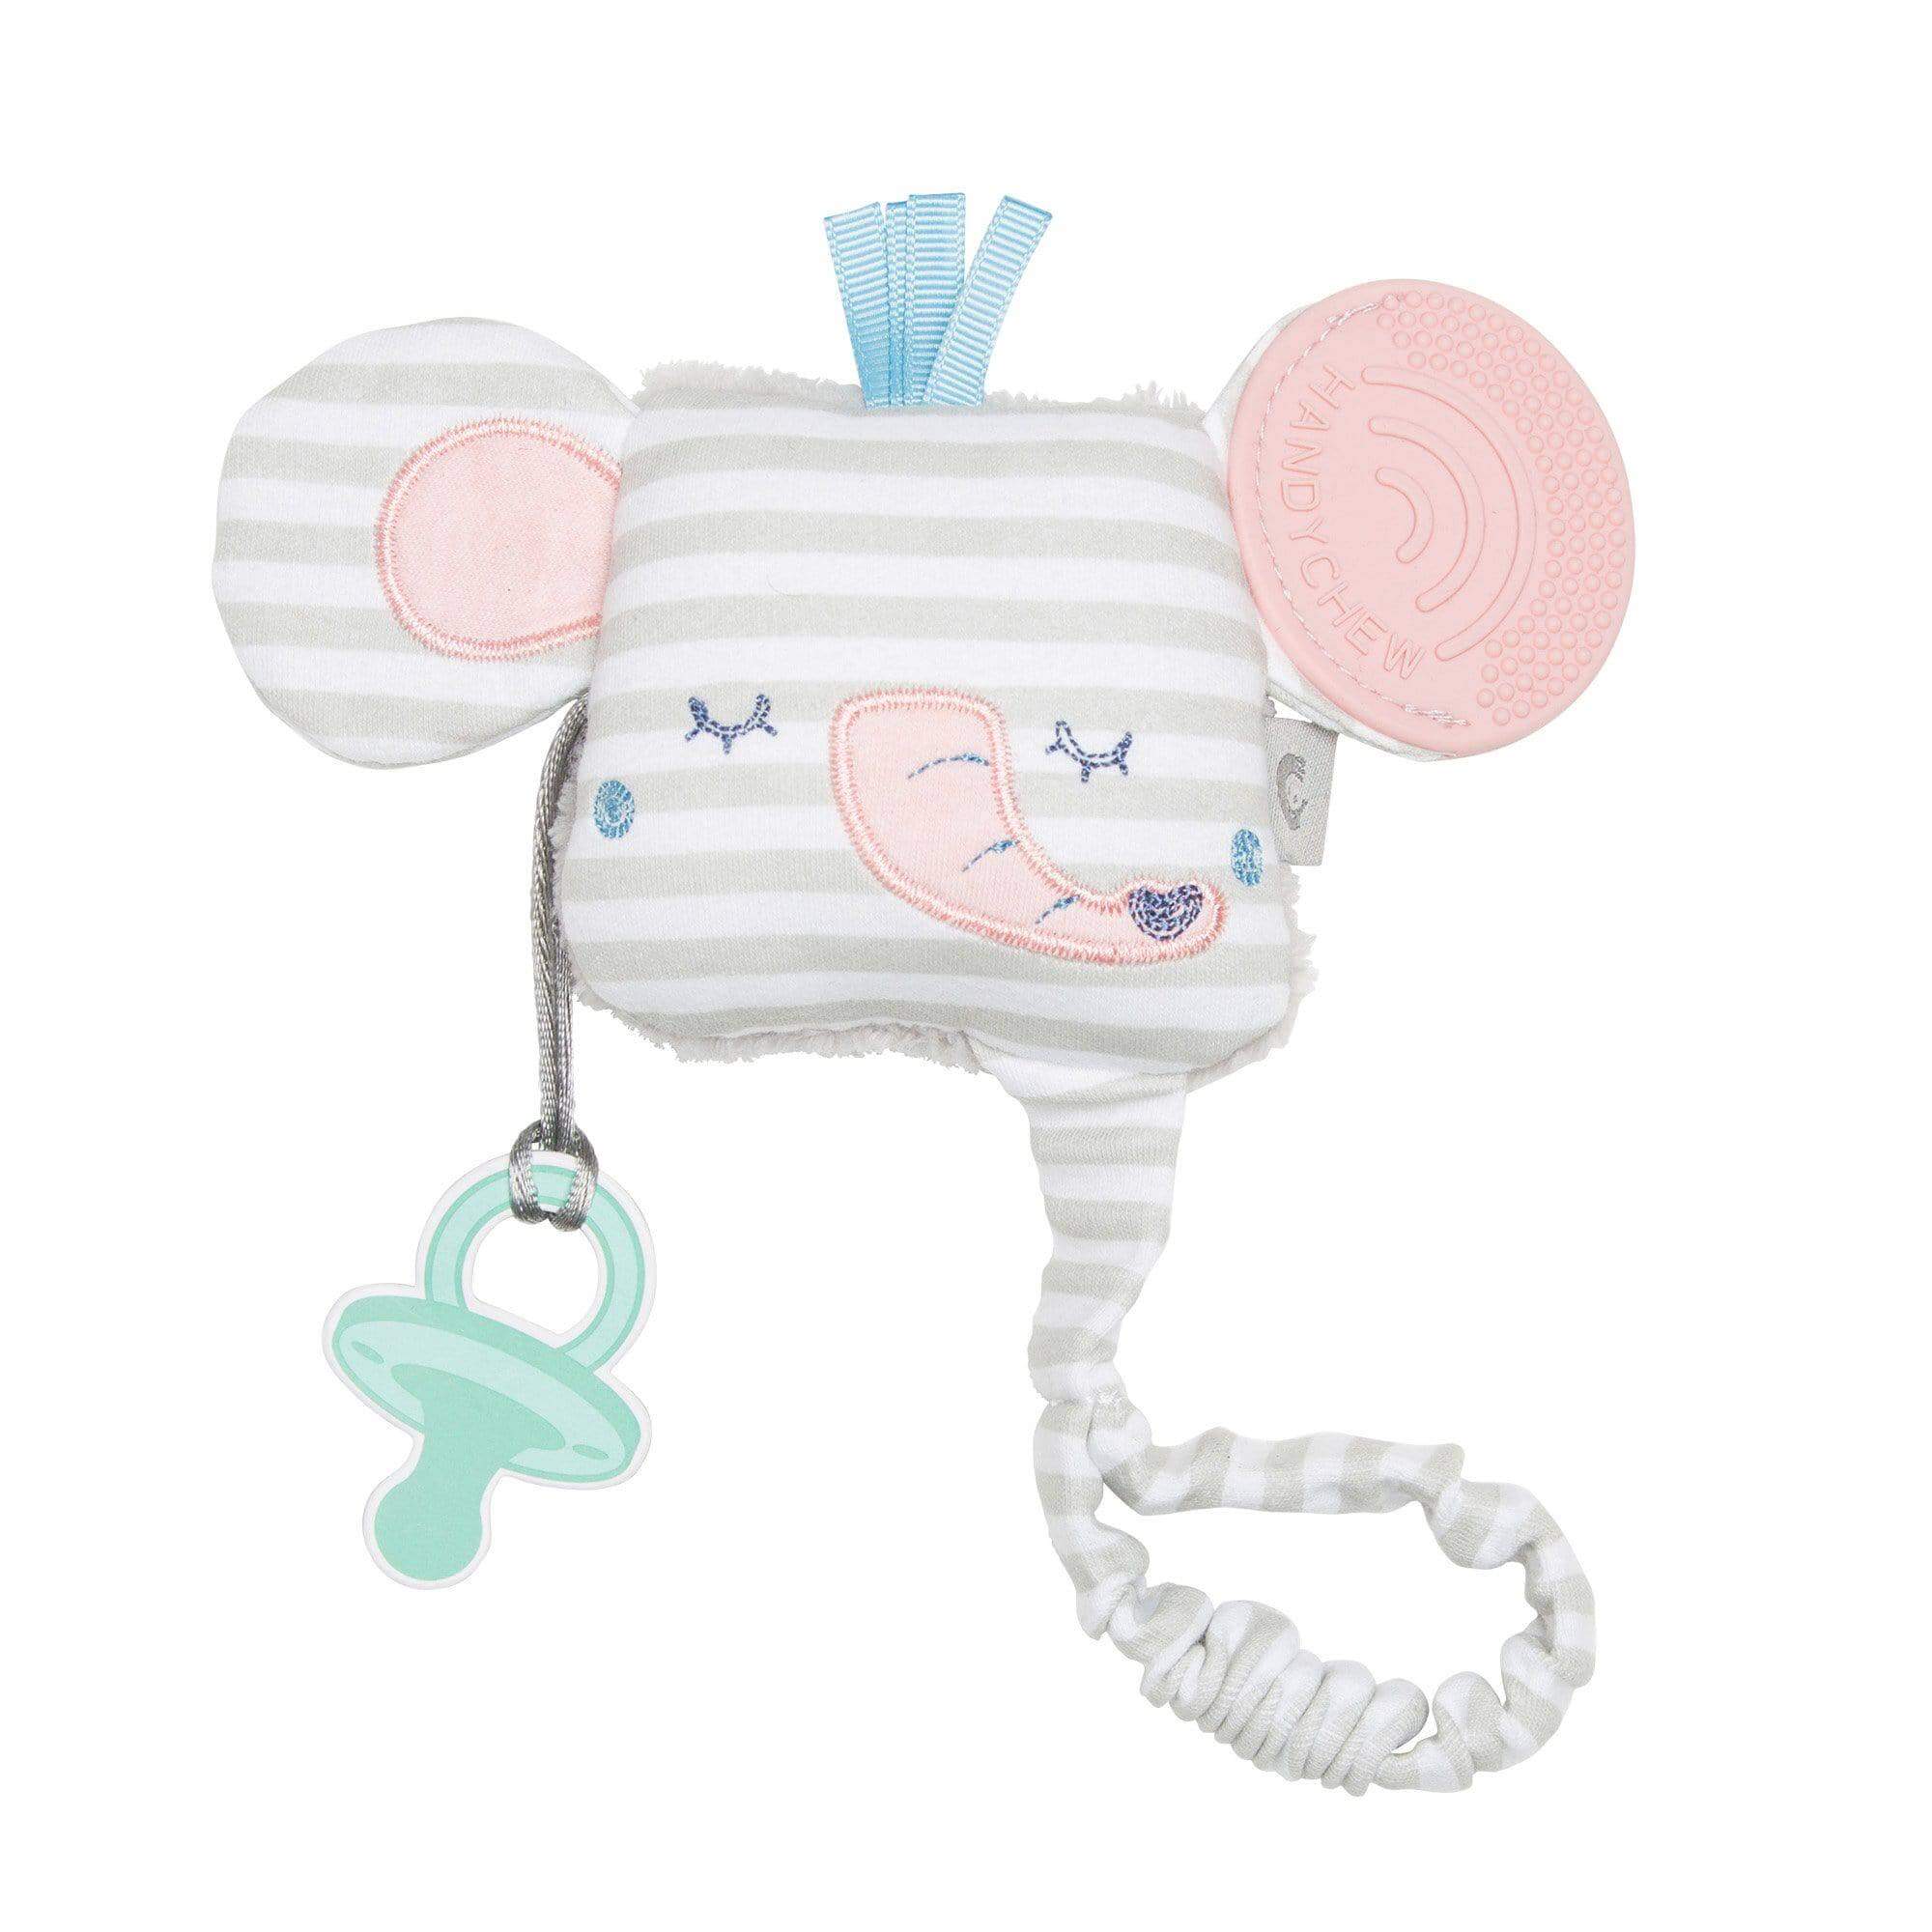 Darcy the Elephant Handychew - Sensory Baby Teething Toy - Cheeky Chompers